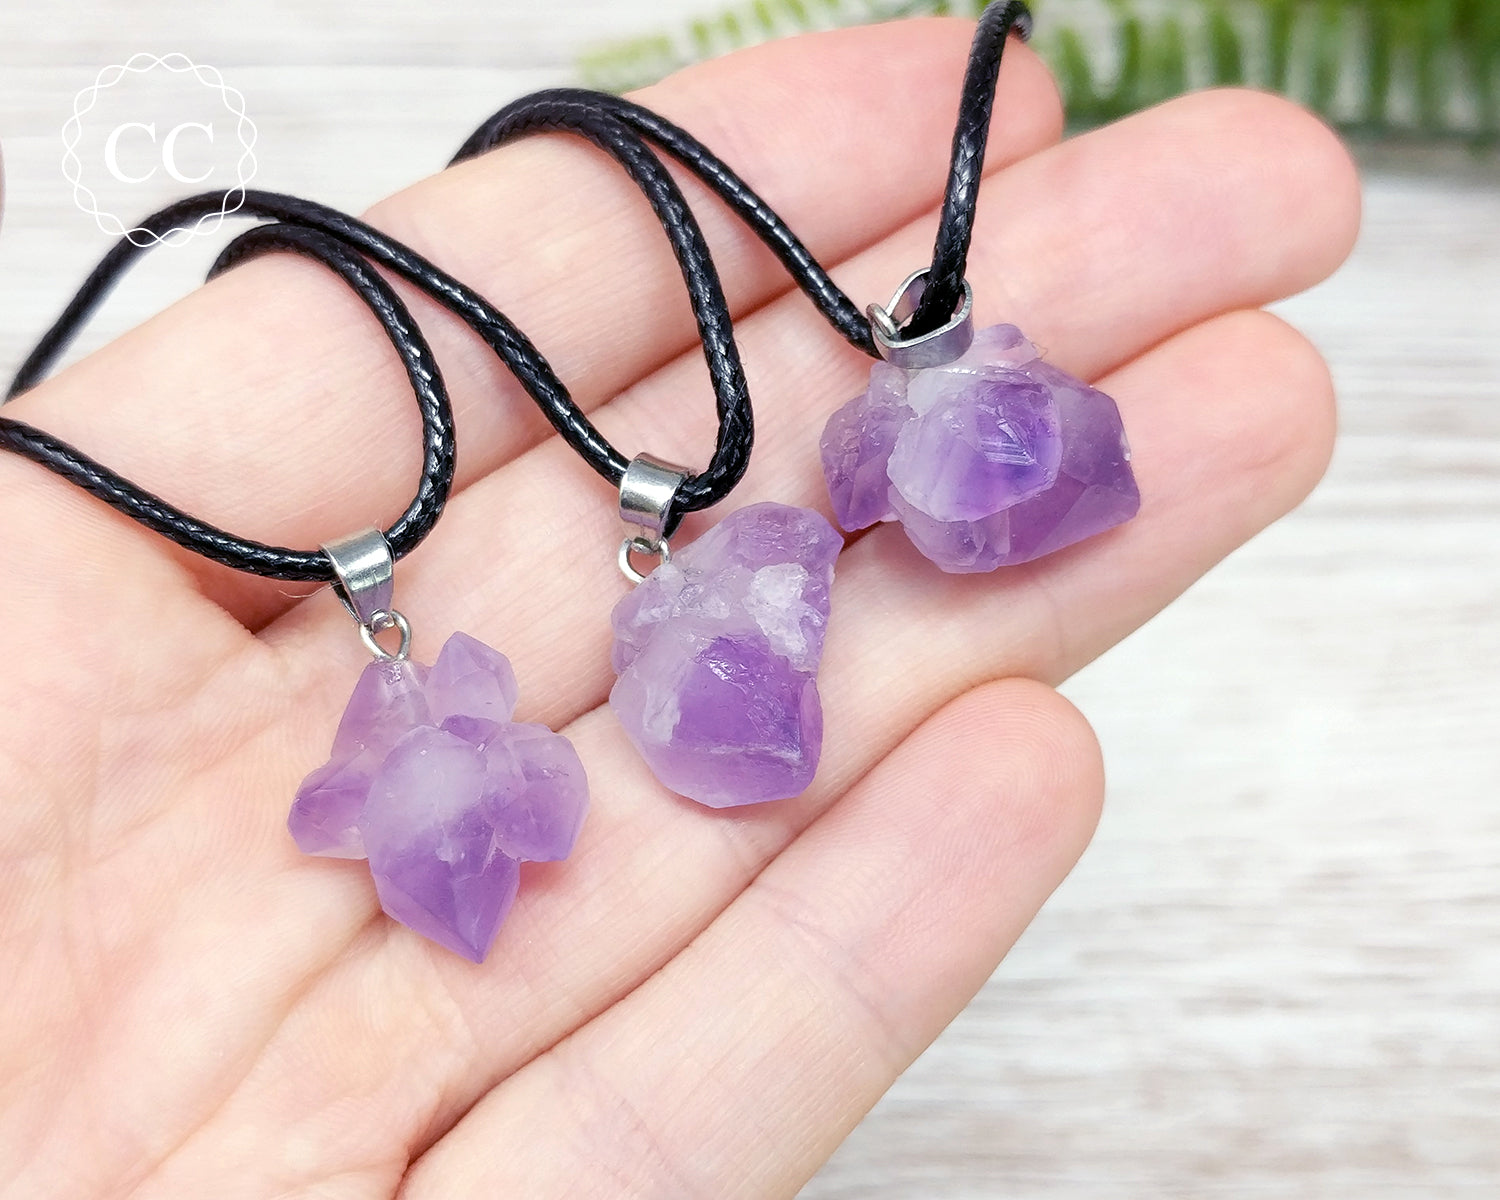 Mini Raw Crystal Necklace, Witchy Boho Gemstone Pendant, Pagan Wiccan Stone  Jewelry, Natural Apatite Tanzanite Sunstone Amethyst Necklace - Etsy | Raw  crystal necklace, Raw crystal jewelry, Raw stone necklace